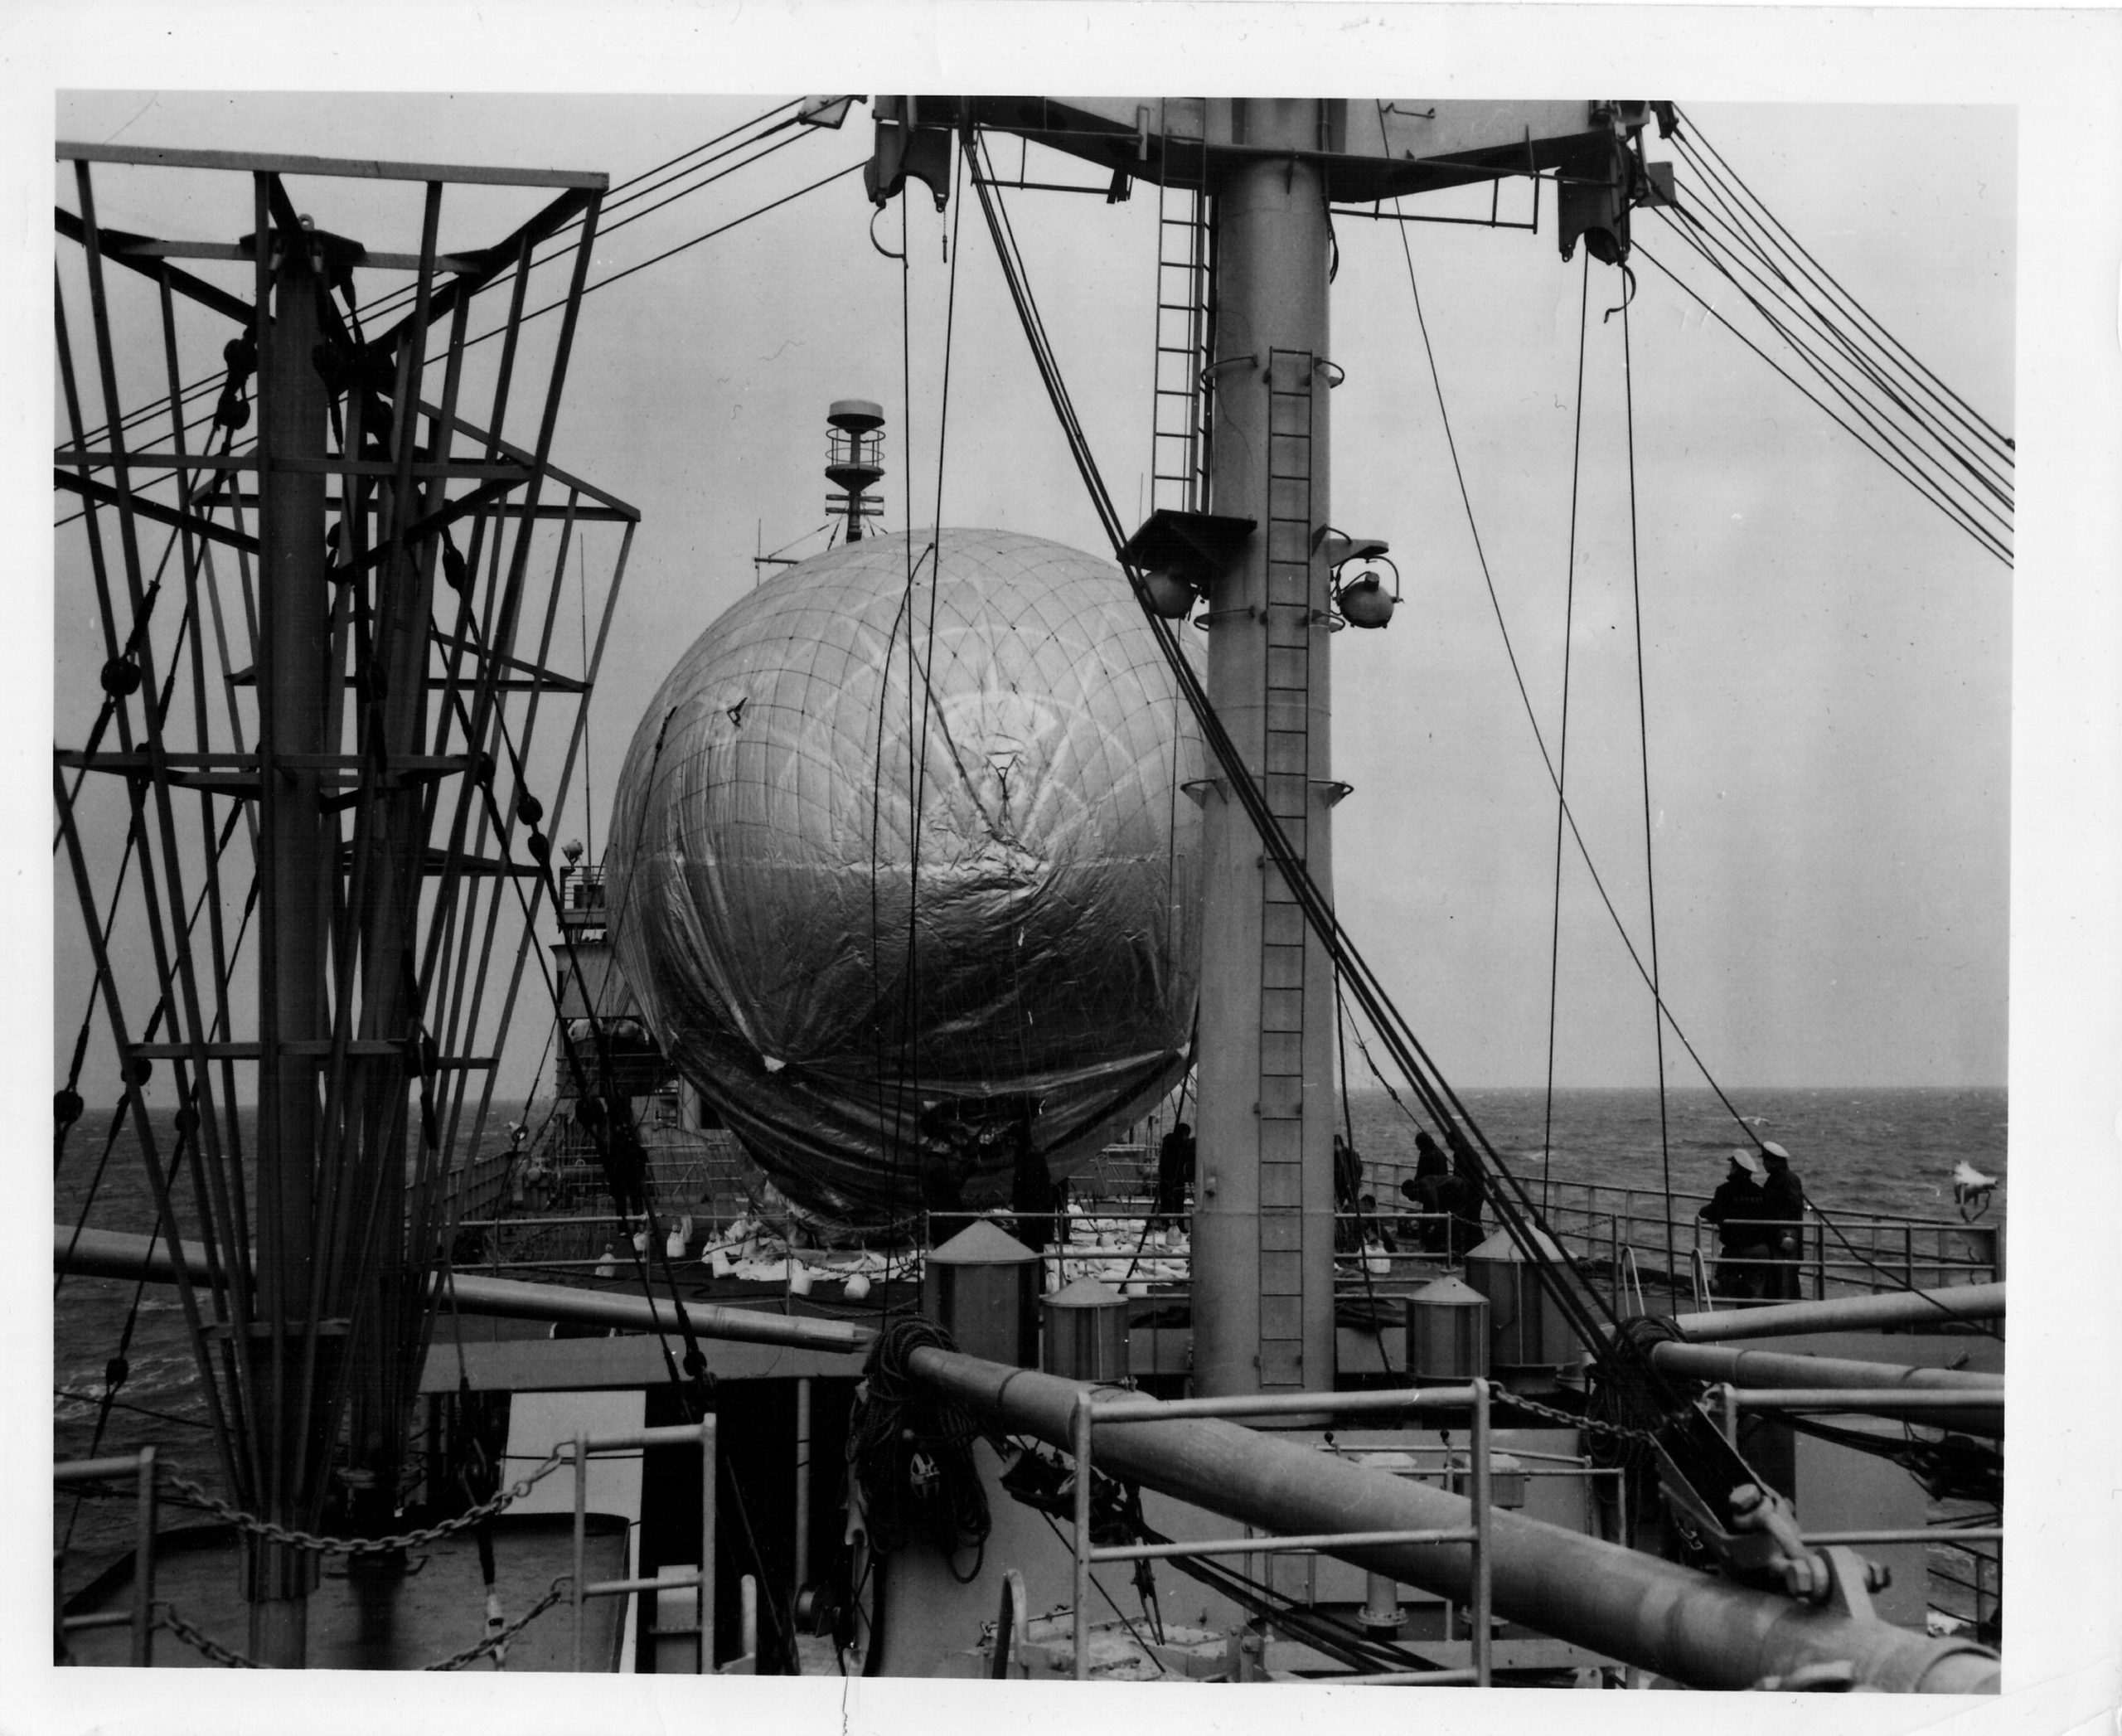 Captive balloon supports a Voice of America antenna on USCGC Courier. October 1952 U.S. Coast Guard photo.